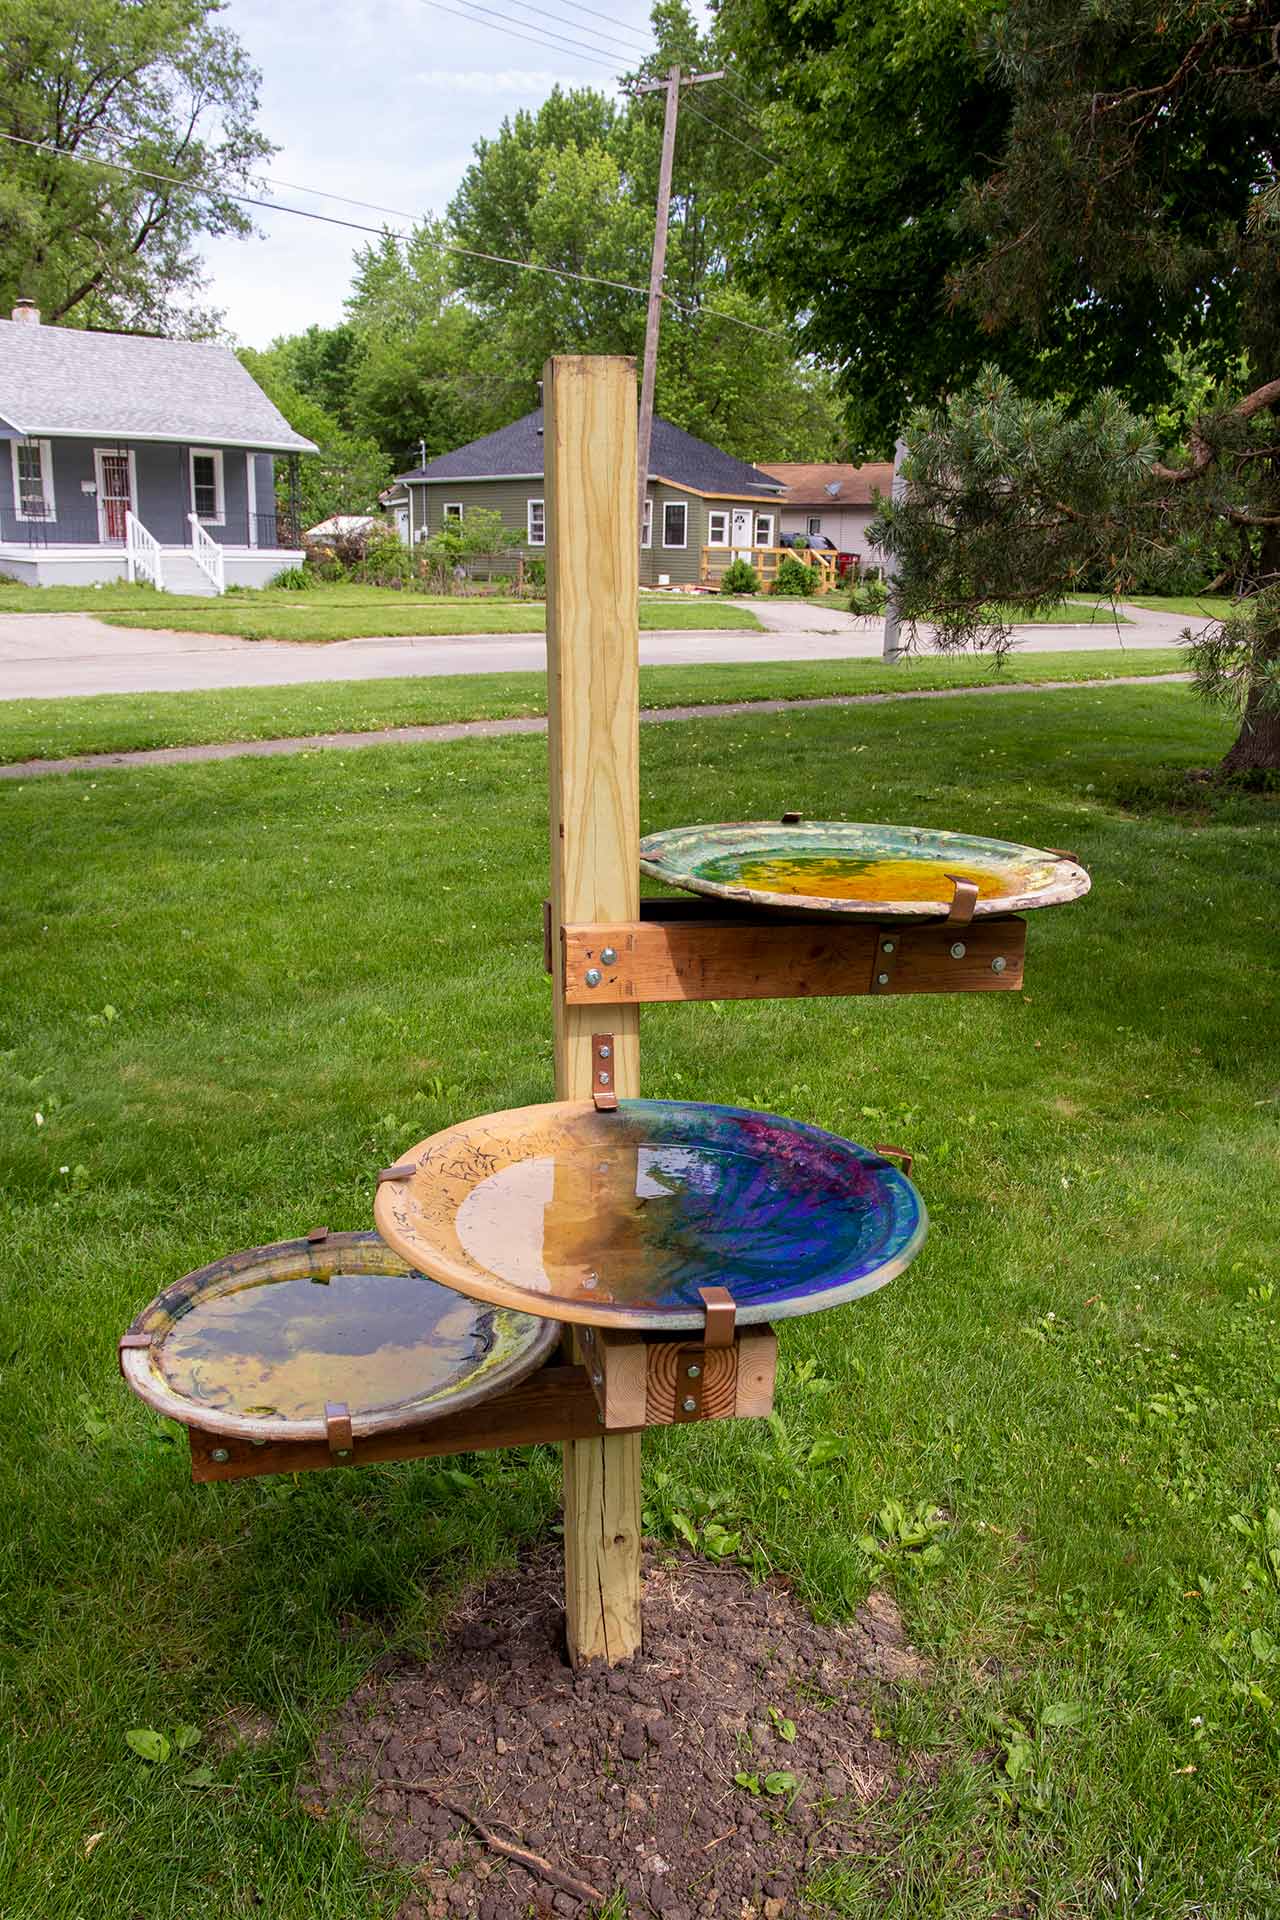 Three colored plates holding water placed on a wooden stick